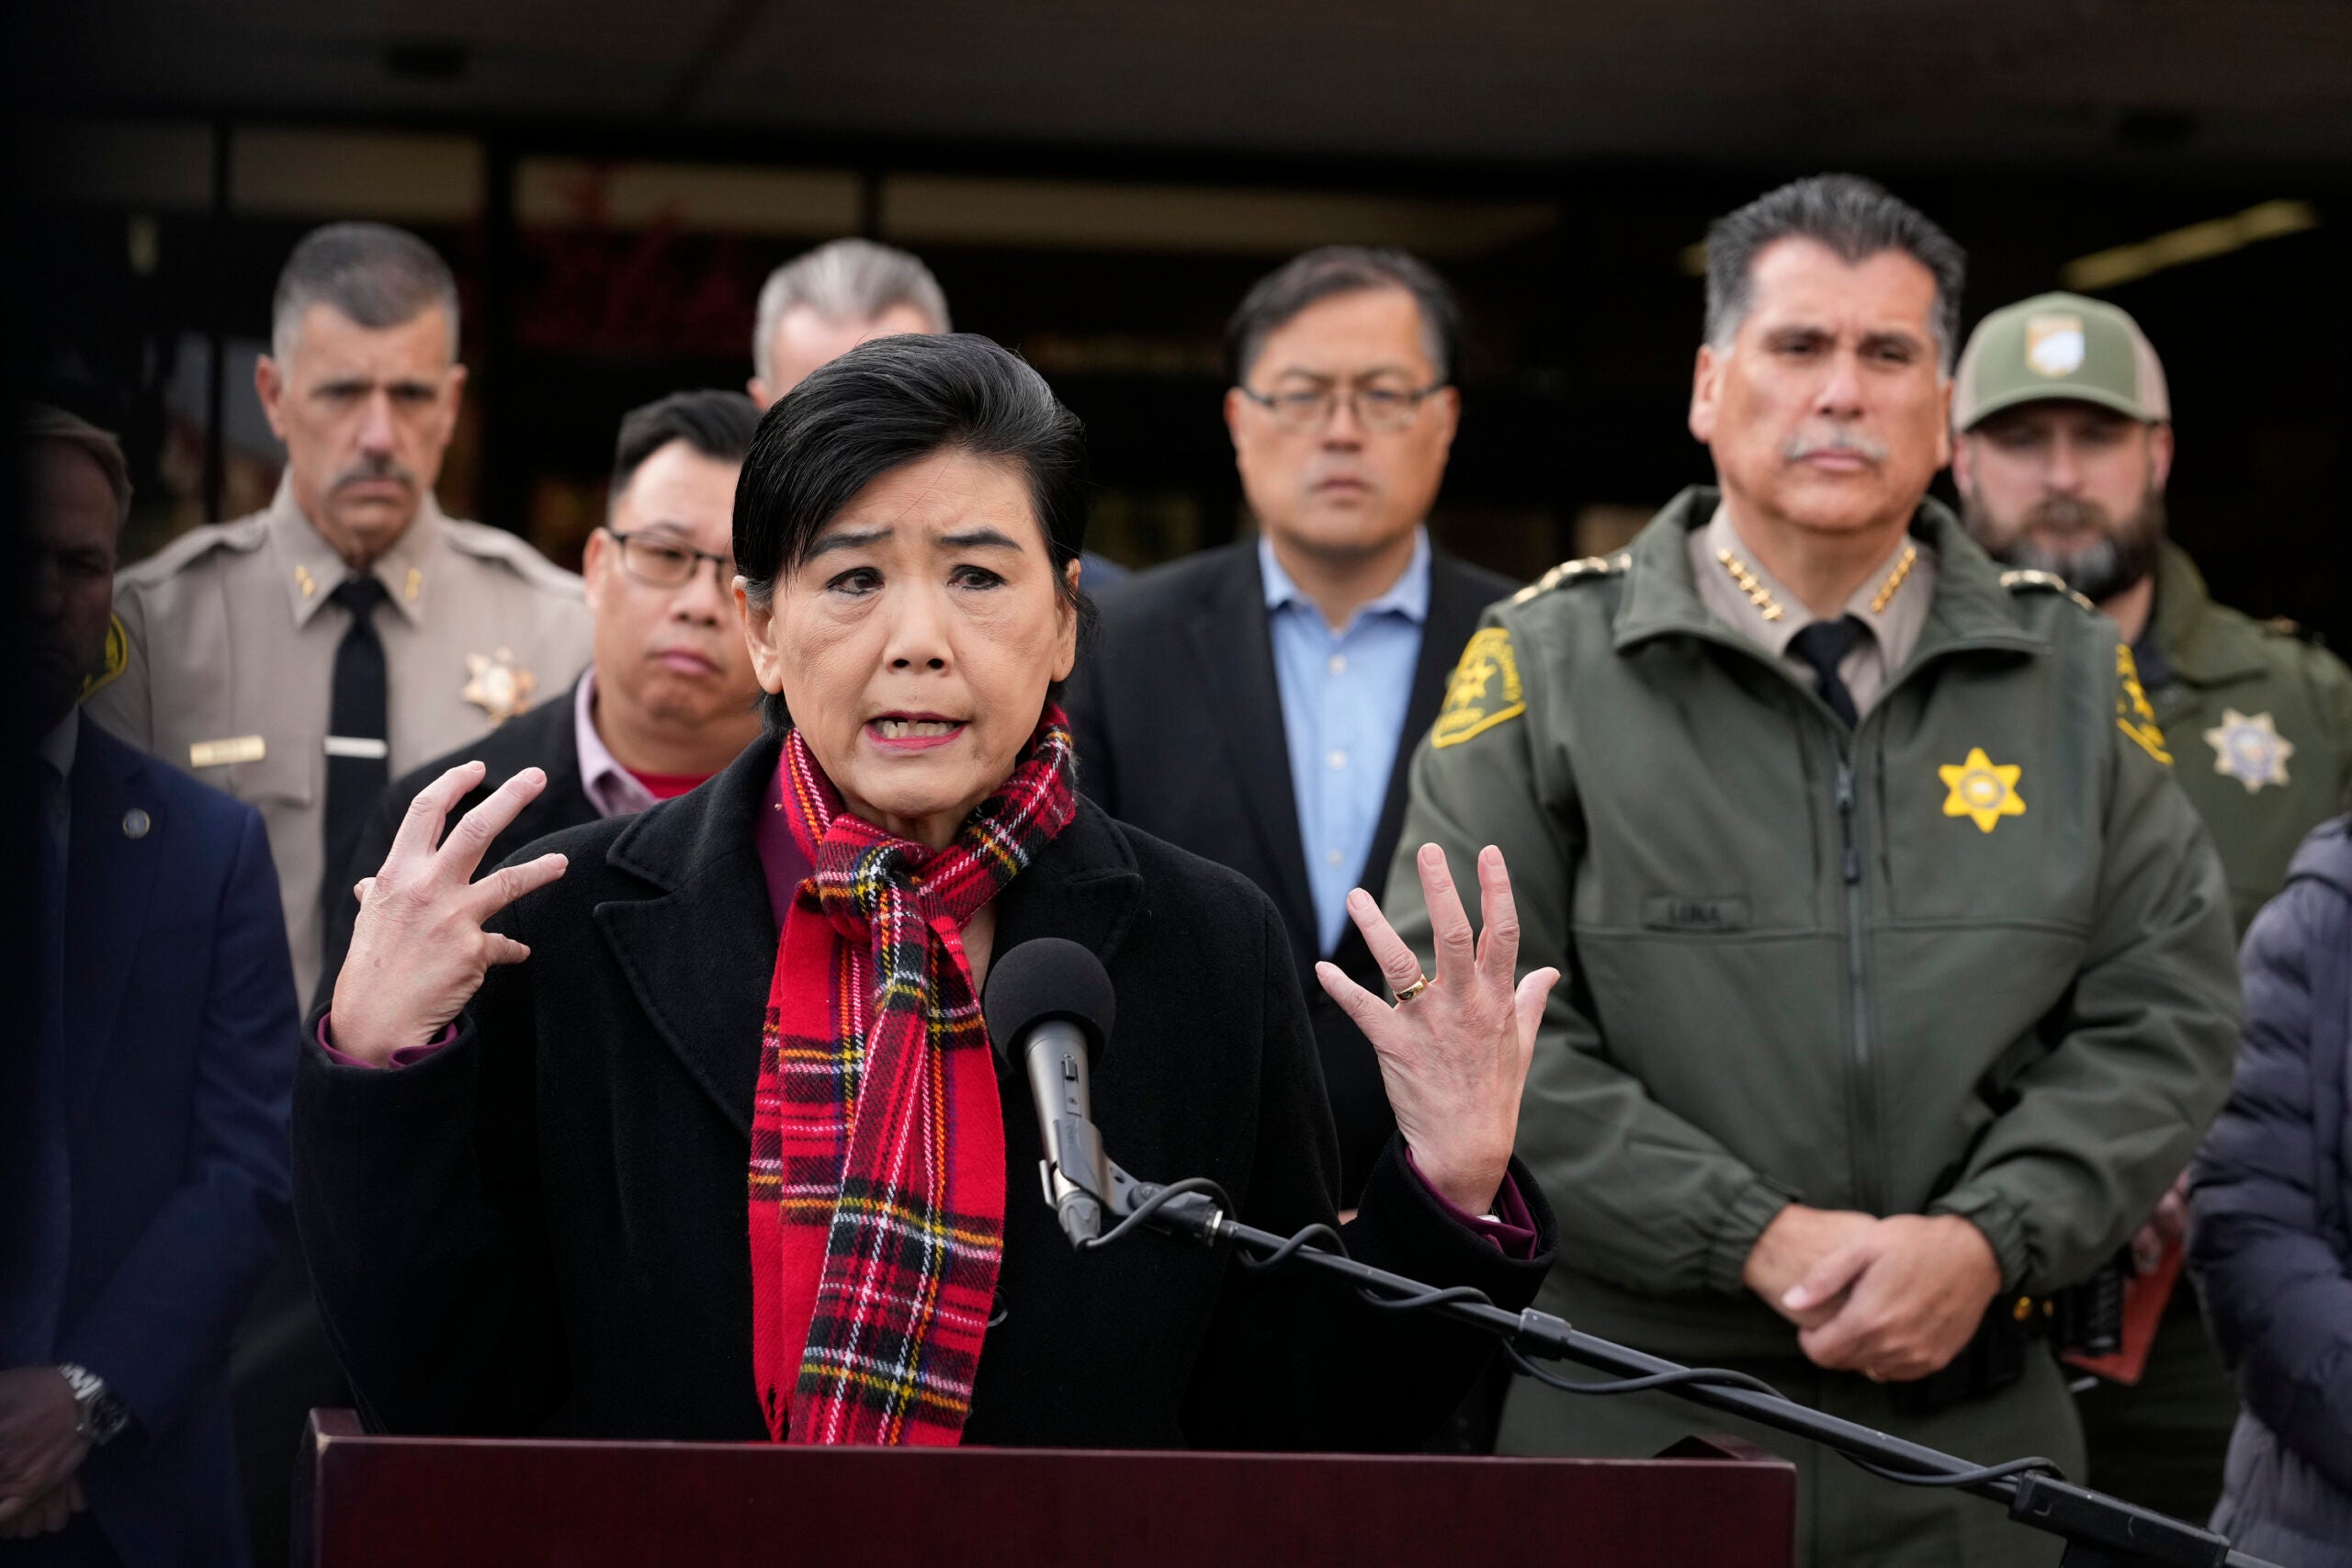 alt= Rep. Judy Chu, D-Calif., left, addresses the media with Los Angeles County Sheriff Robert Luna, right, outside the Civic Center in Monterey Park, Calif., Sunday, Jan. 22, 2023.